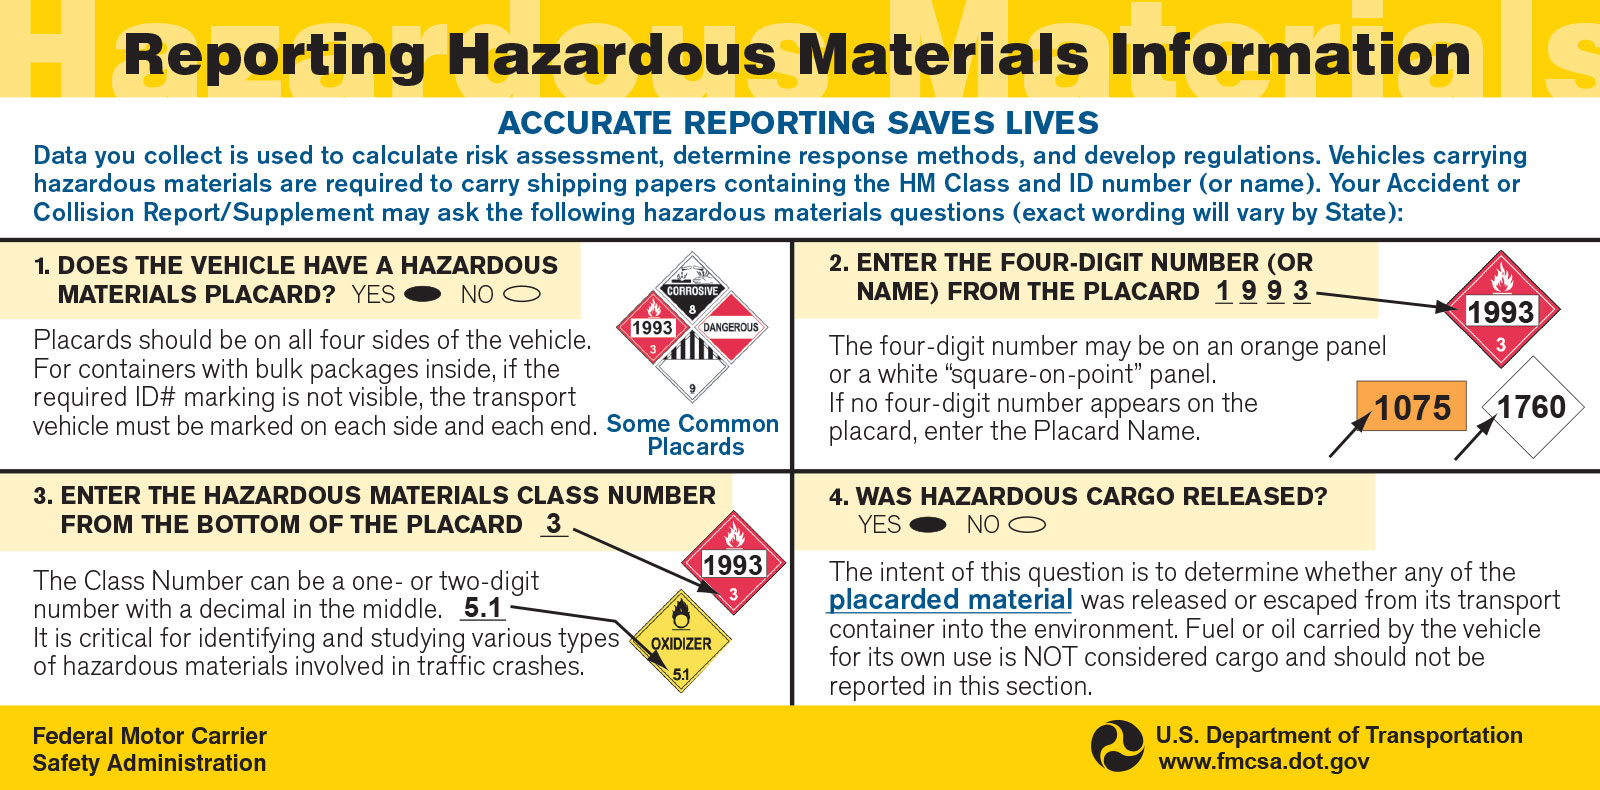 A sign that reads "Reporting Hazardous Materials Information"